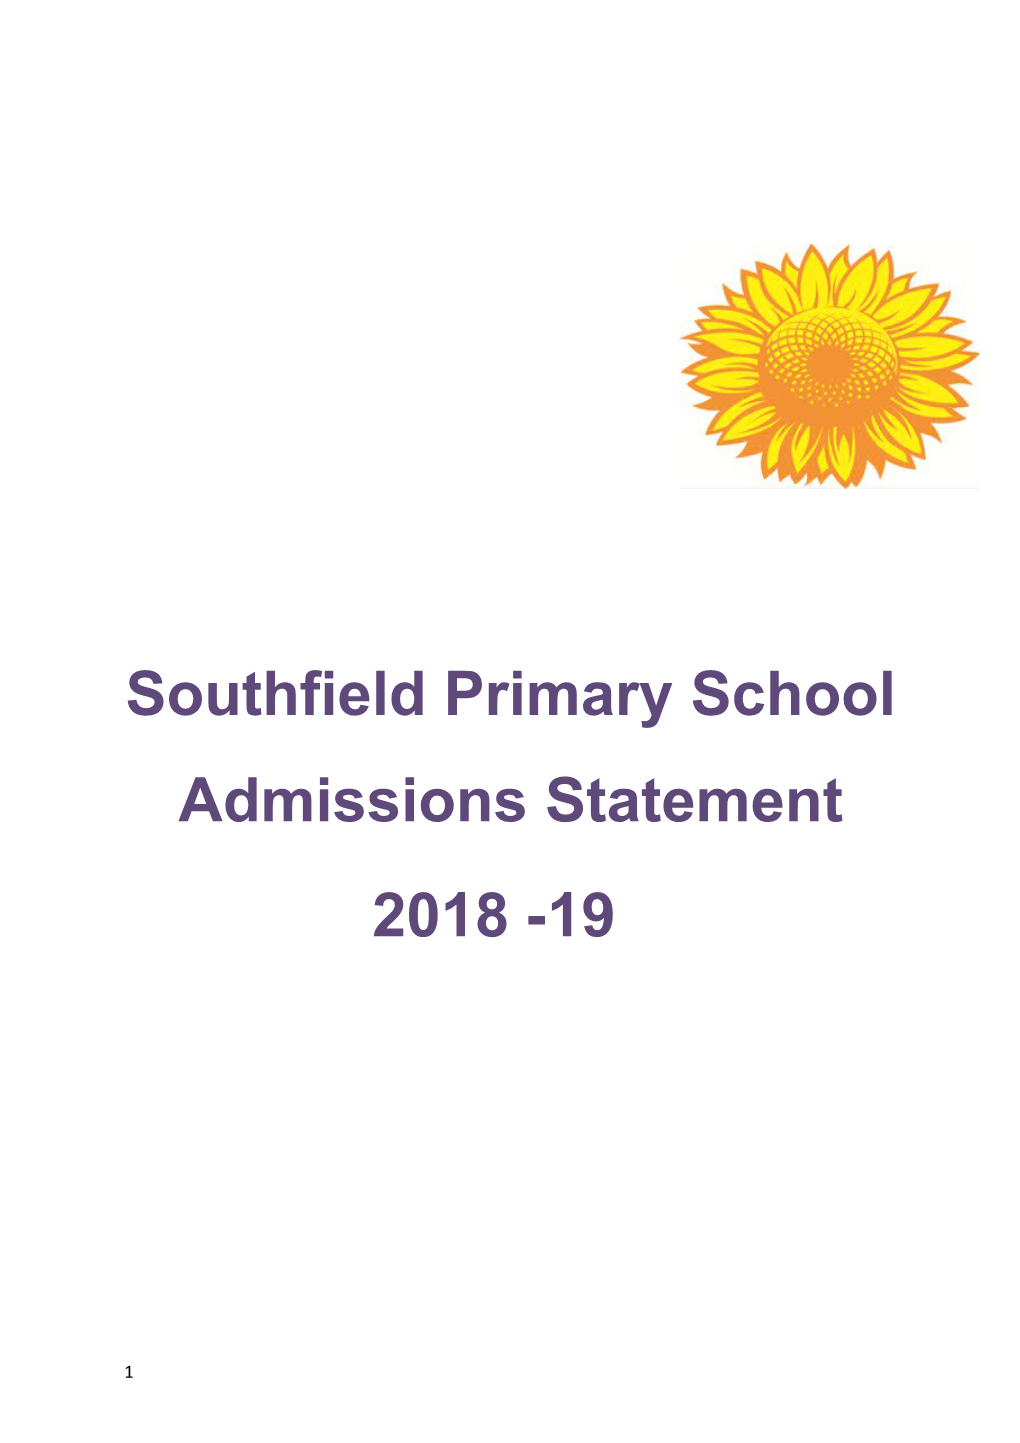 Southfield Primary School Admissions Statement s1